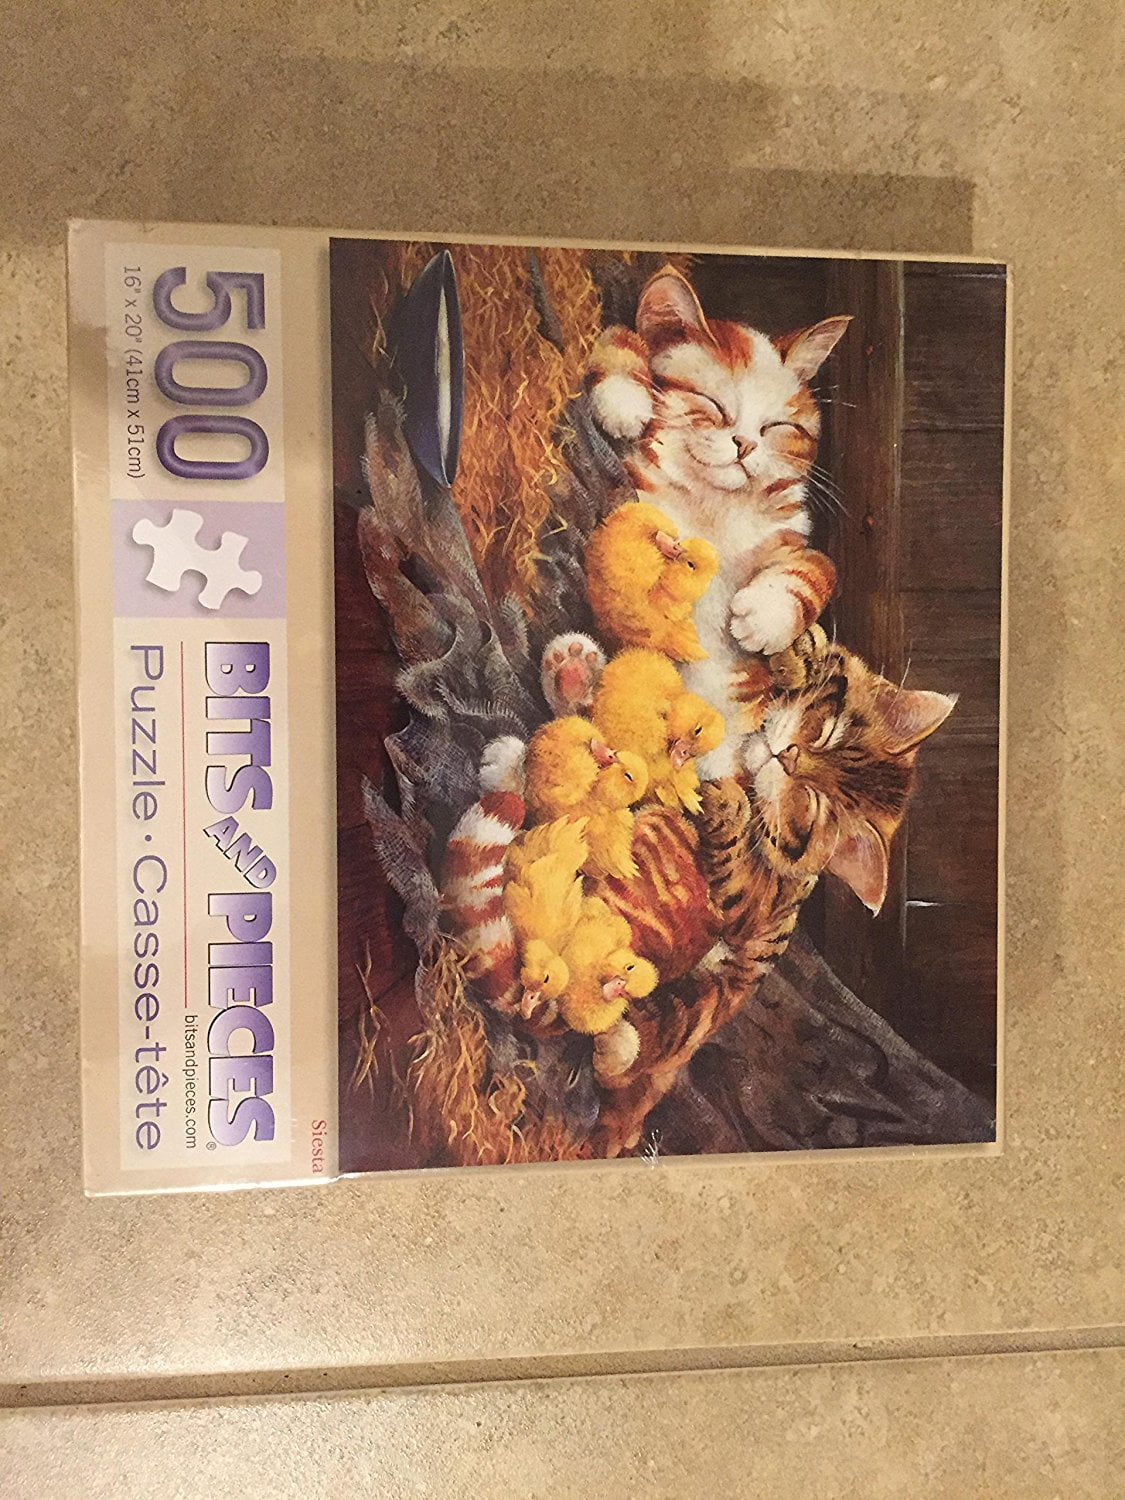 Bits and Pieces Siesta Jigsaw Puzzle 500 Piece 46980 Lynne Jones Kittens 16 X 20 for sale online 